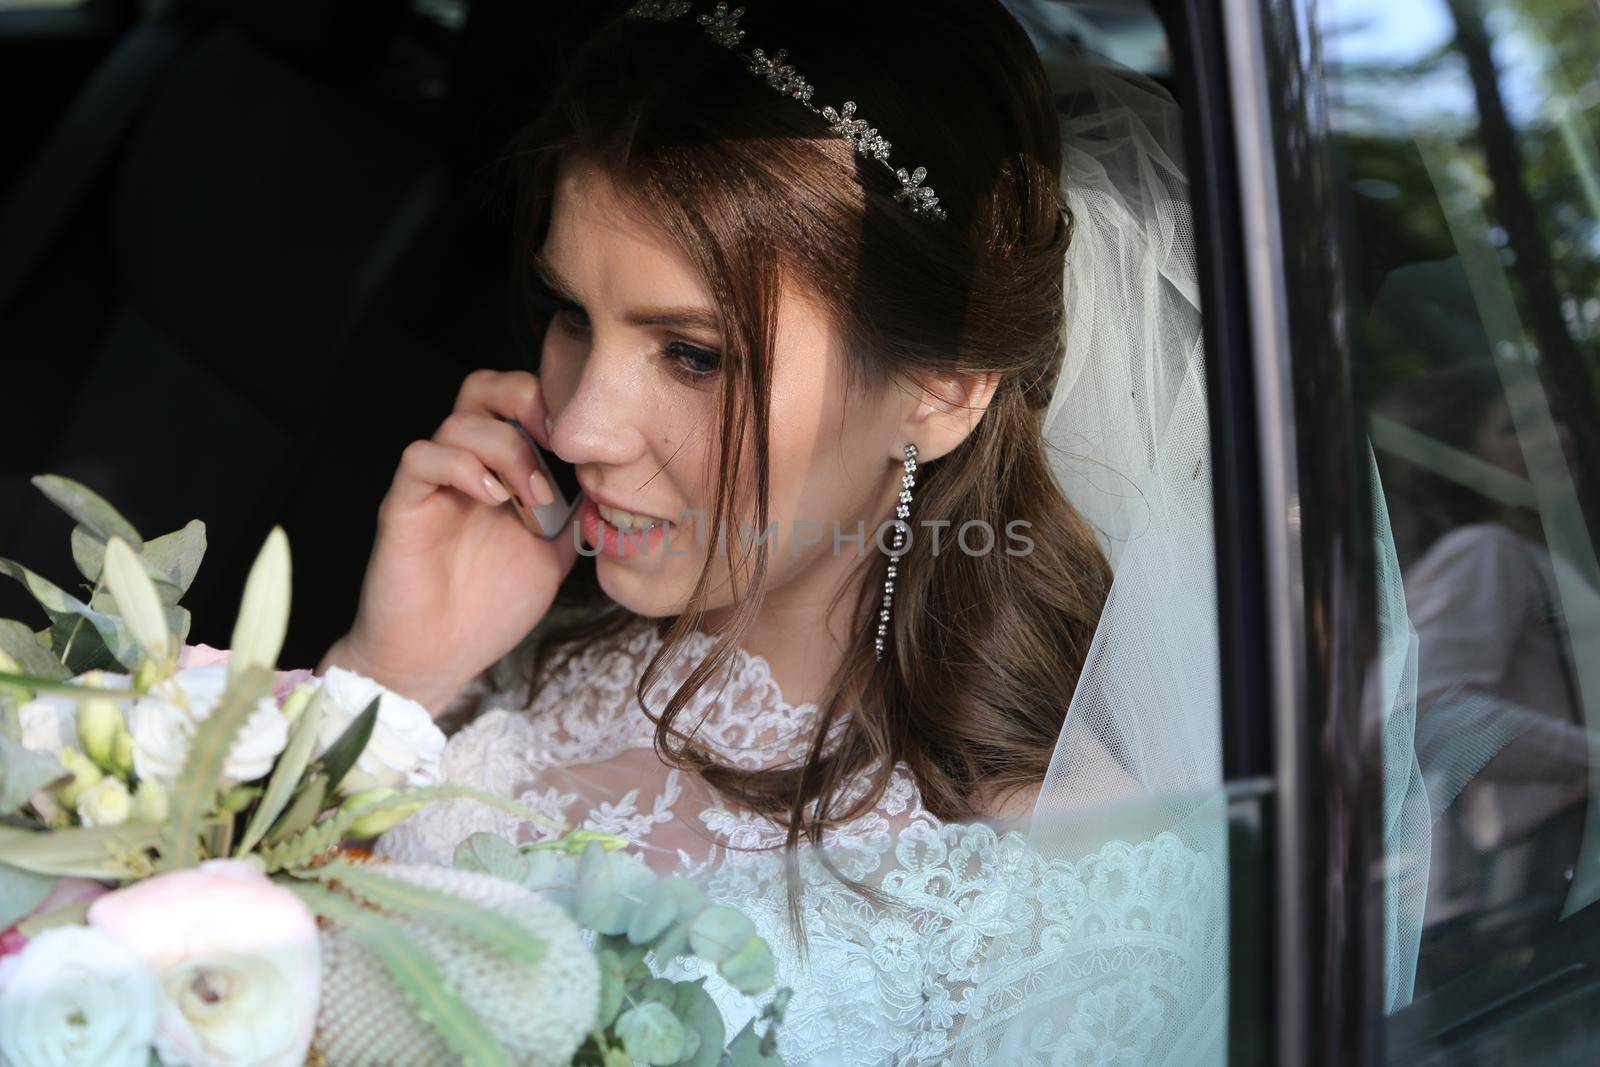 Wedding photo of the bride who is sitting in the car with a bouquet of flowers and talking on the phone.